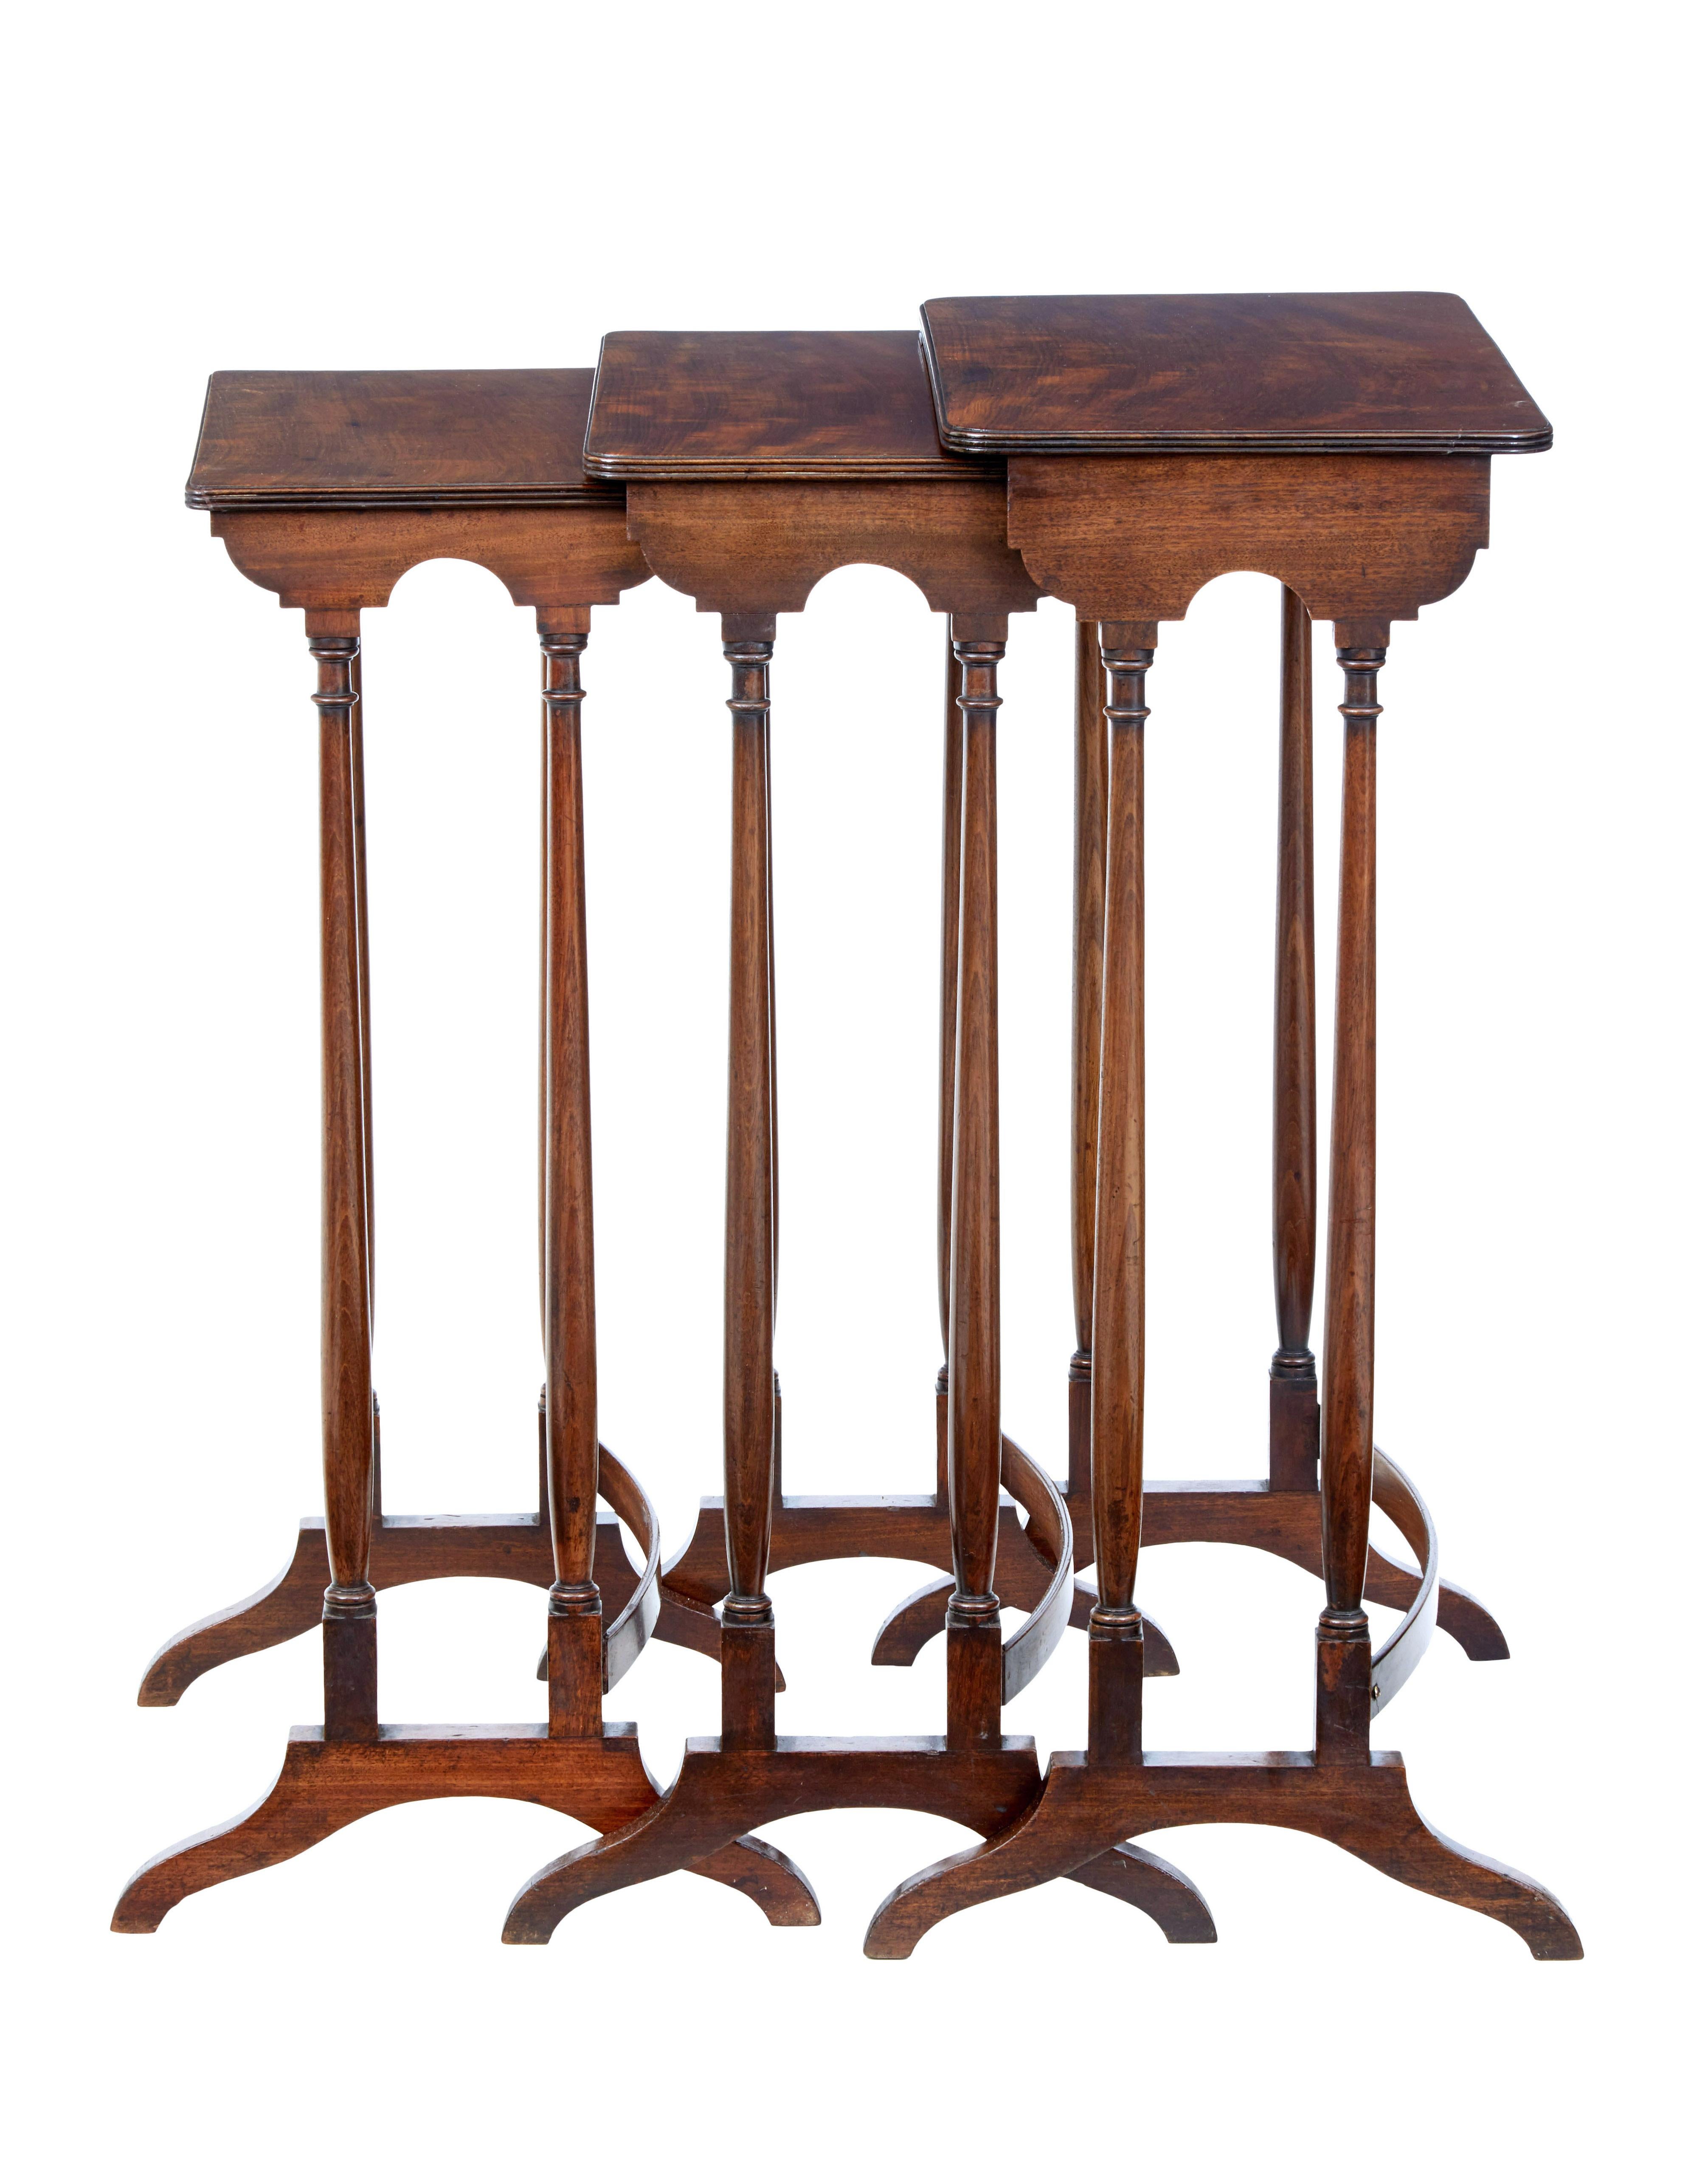 Fine set of English nesting tables circa 1860.

Beautiful mahogany tops with good colour and patina. Each standing on turned legs and shaped back stretcher.

Elegant set ready to use in the home.

Heights range from 28 1/4